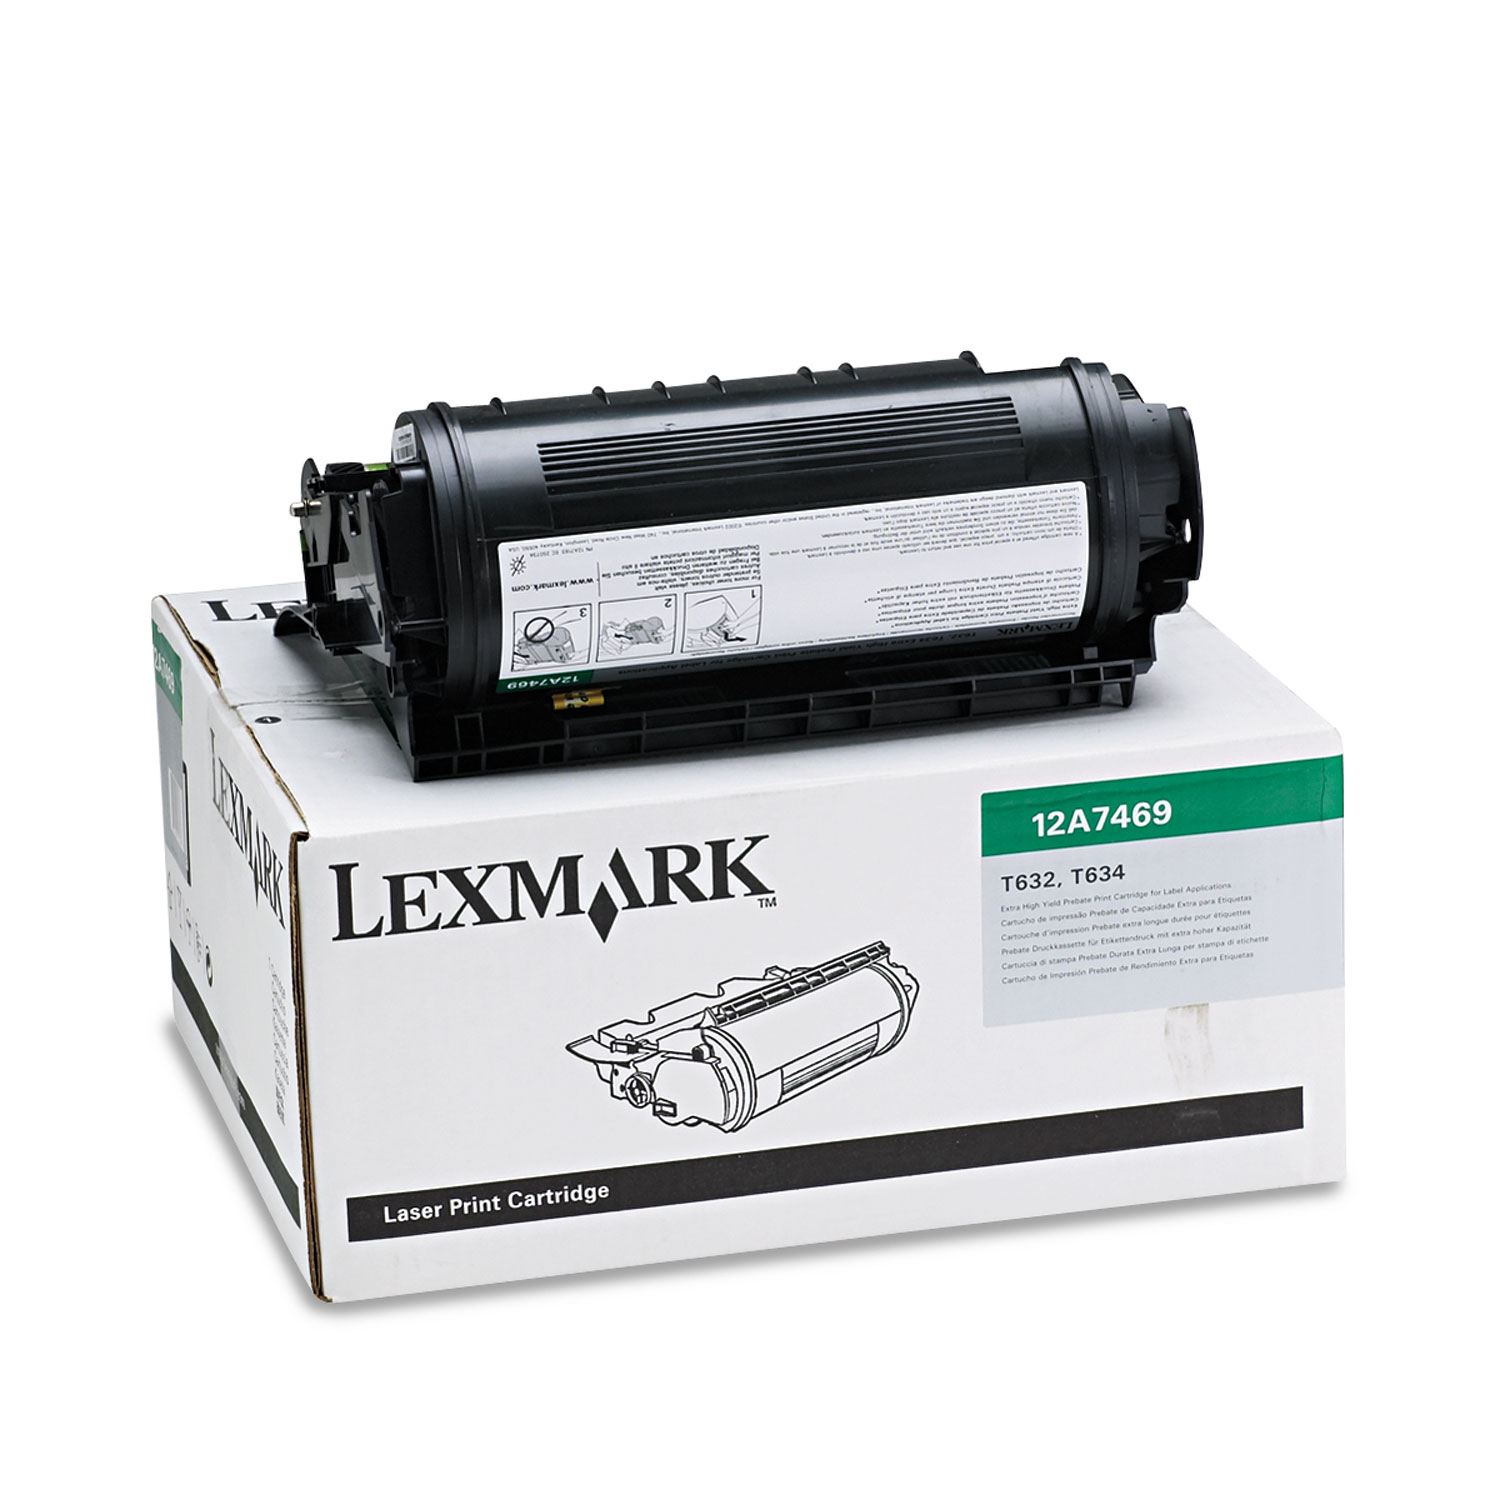 Lexmark LEX12A7469  12A7469 Extra High-Yield Toner, 32000 Page-Yield, Black